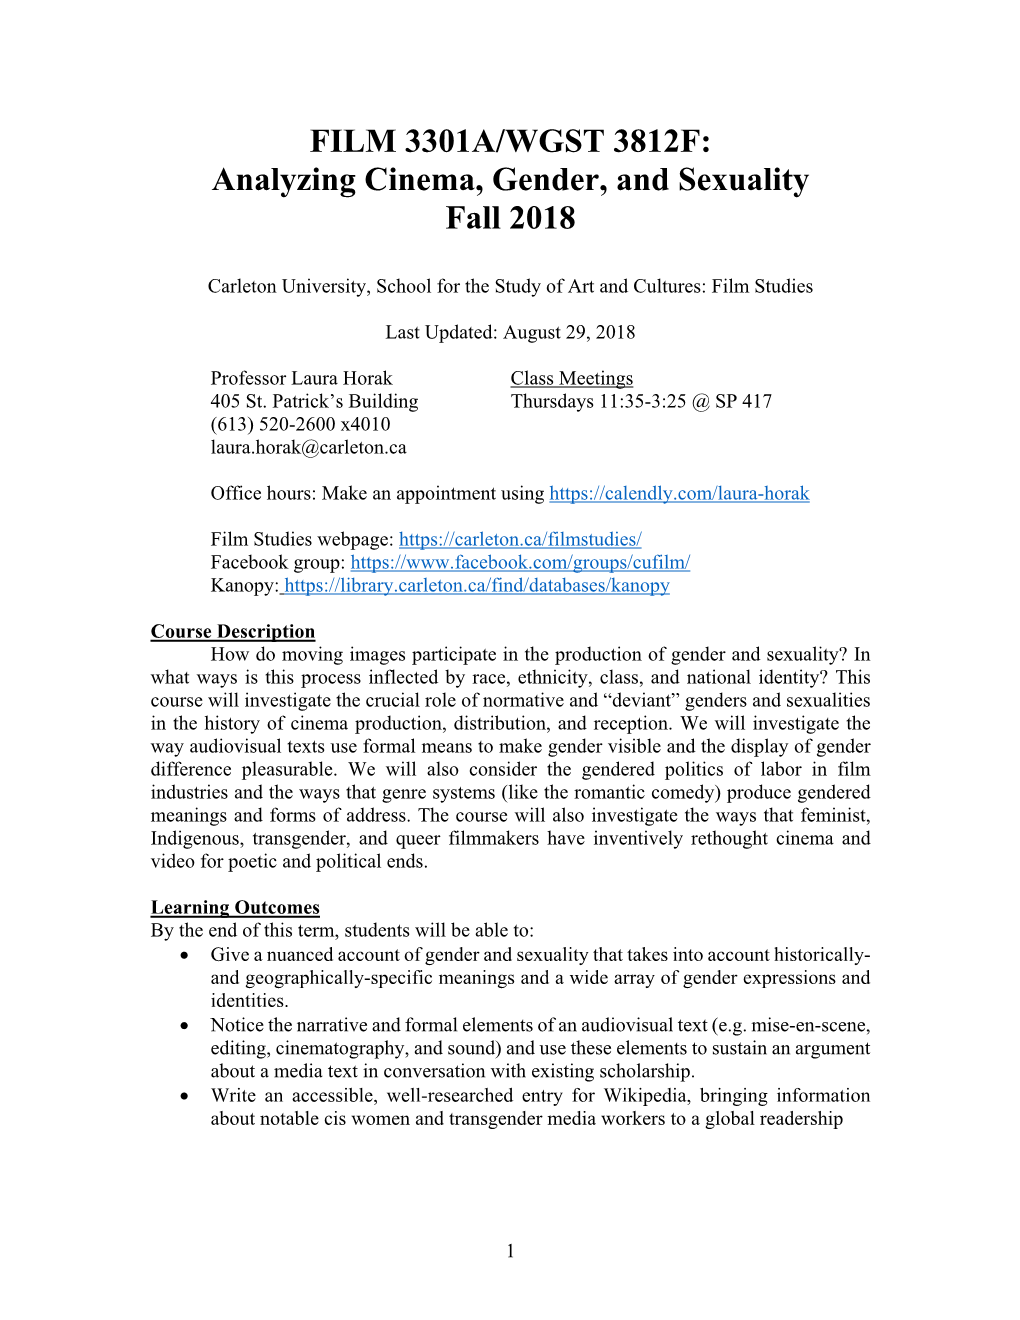 FILM 3301A/WGST 3812F: Analyzing Cinema, Gender, and Sexuality Fall 2018